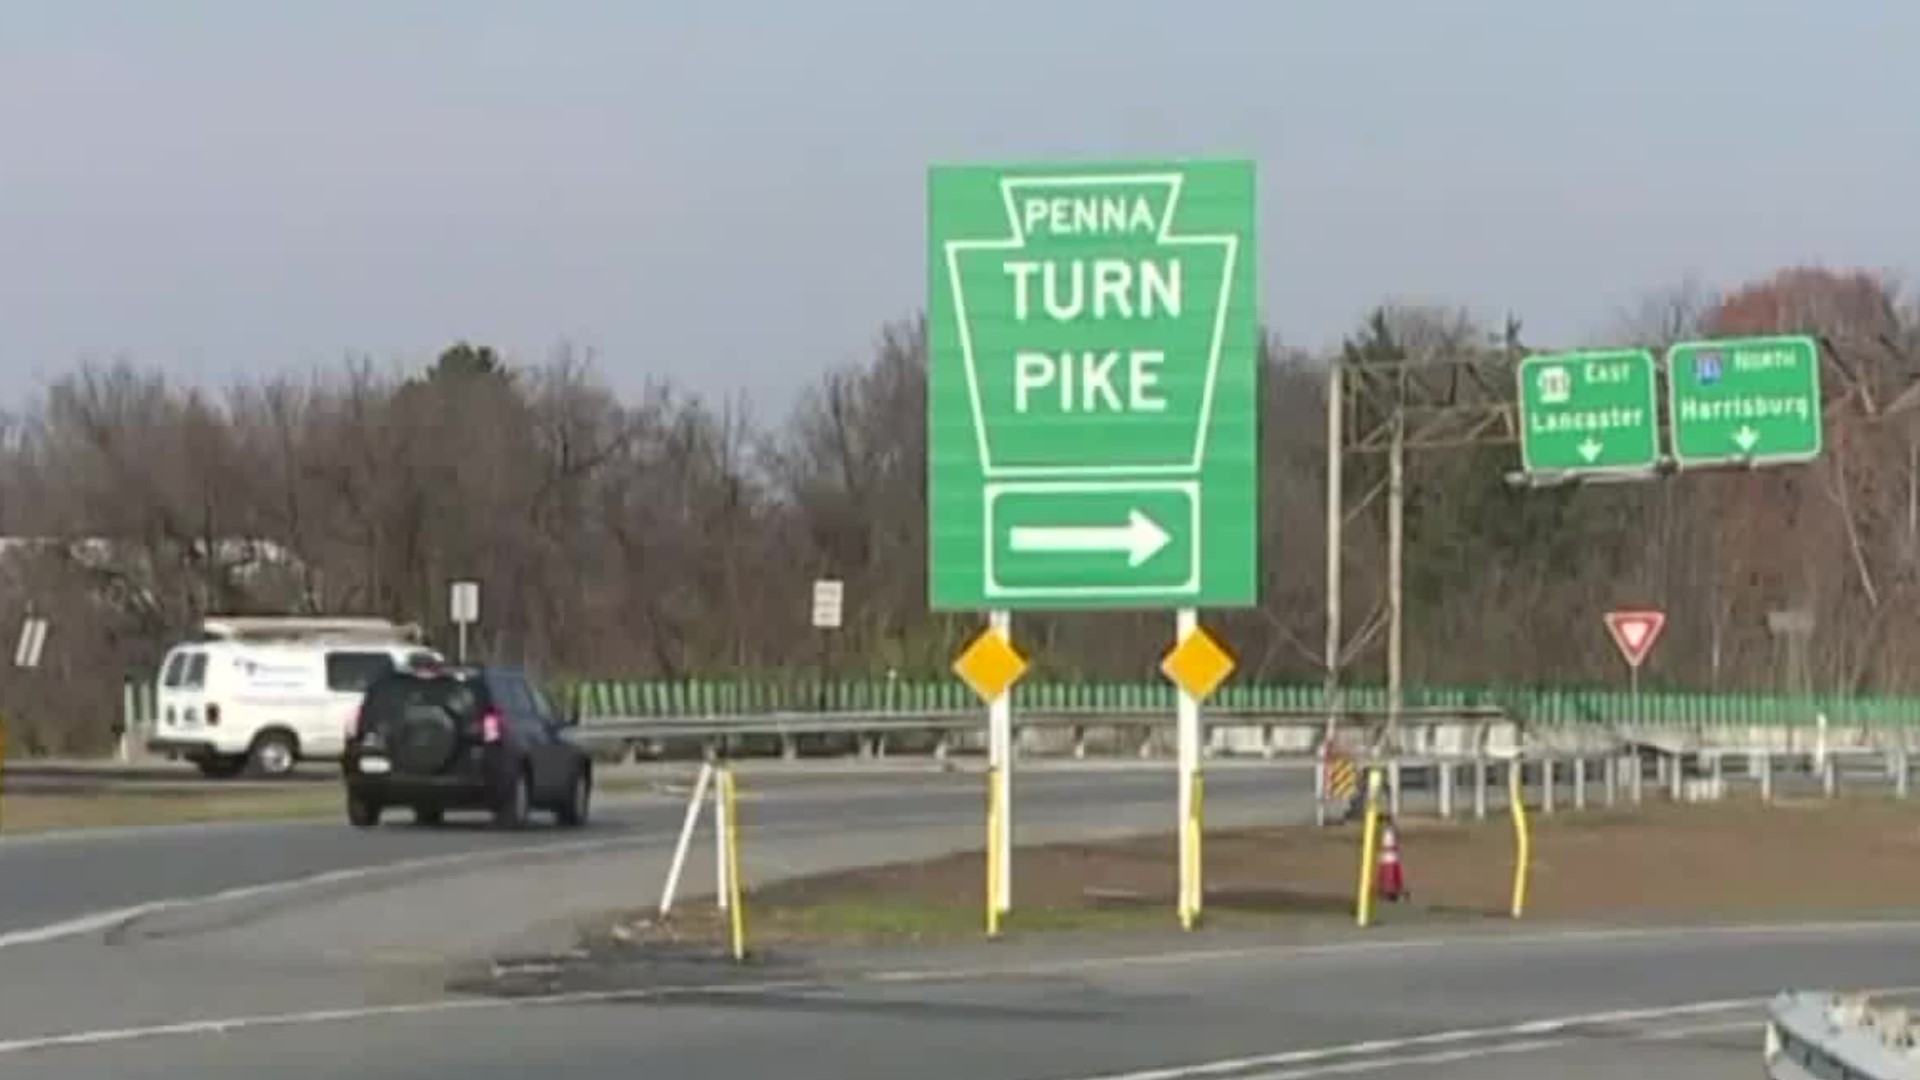 According to the Turnpike Commissions toll calculator, a trip across the Turnpike end-to-end is going to cost drivers $124.90 via toll-by-plate or $61.70 with a pass